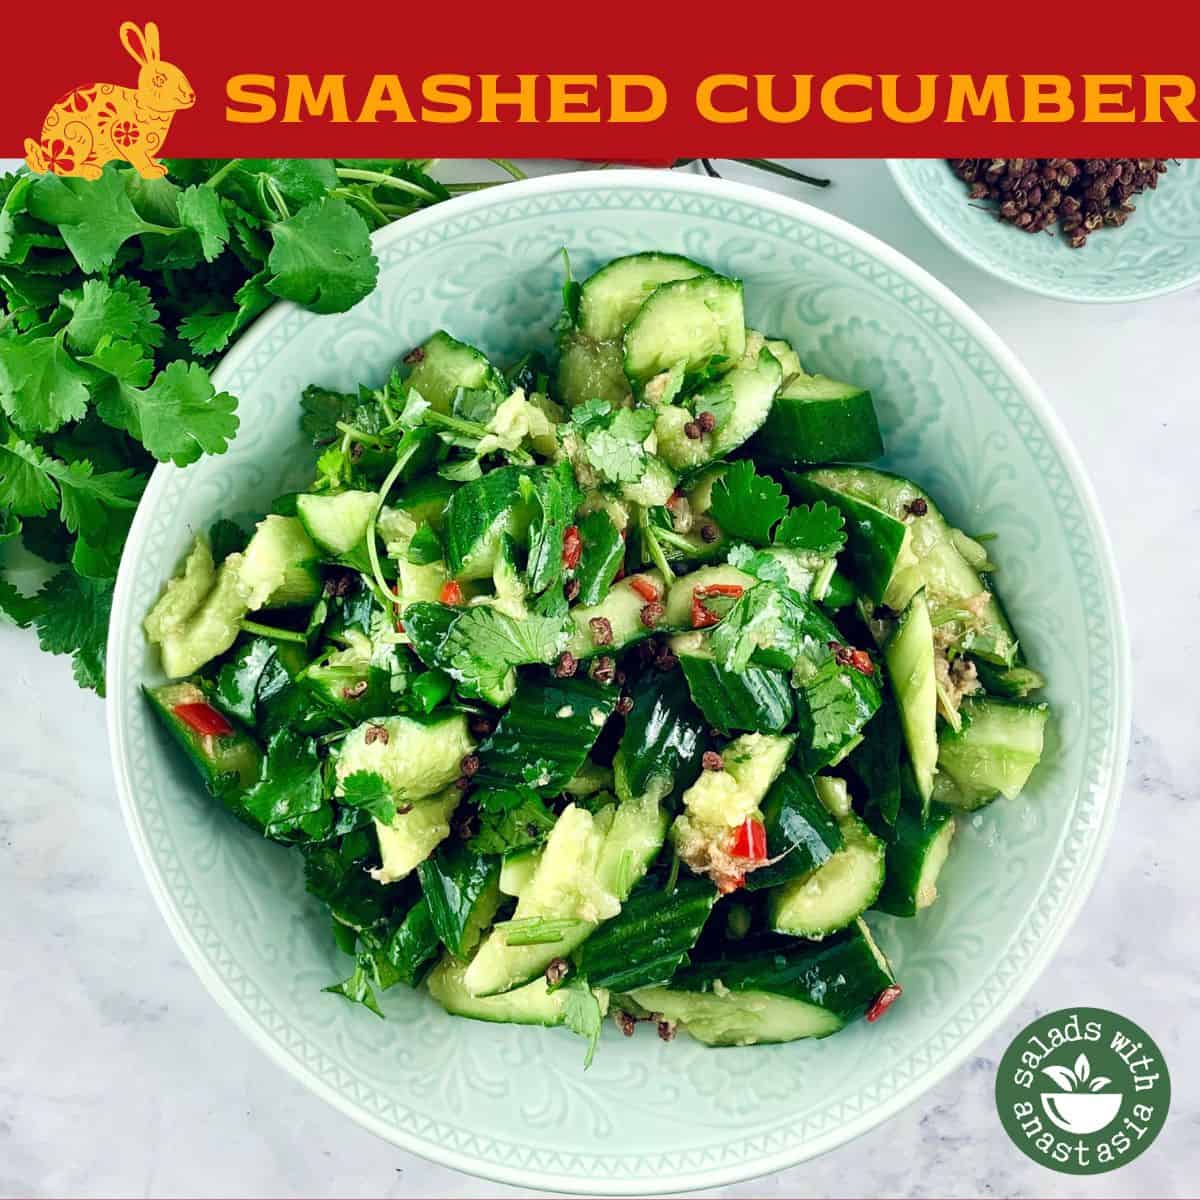 Year of the Rabbit - Smashed cucumber Salad with text overlay.